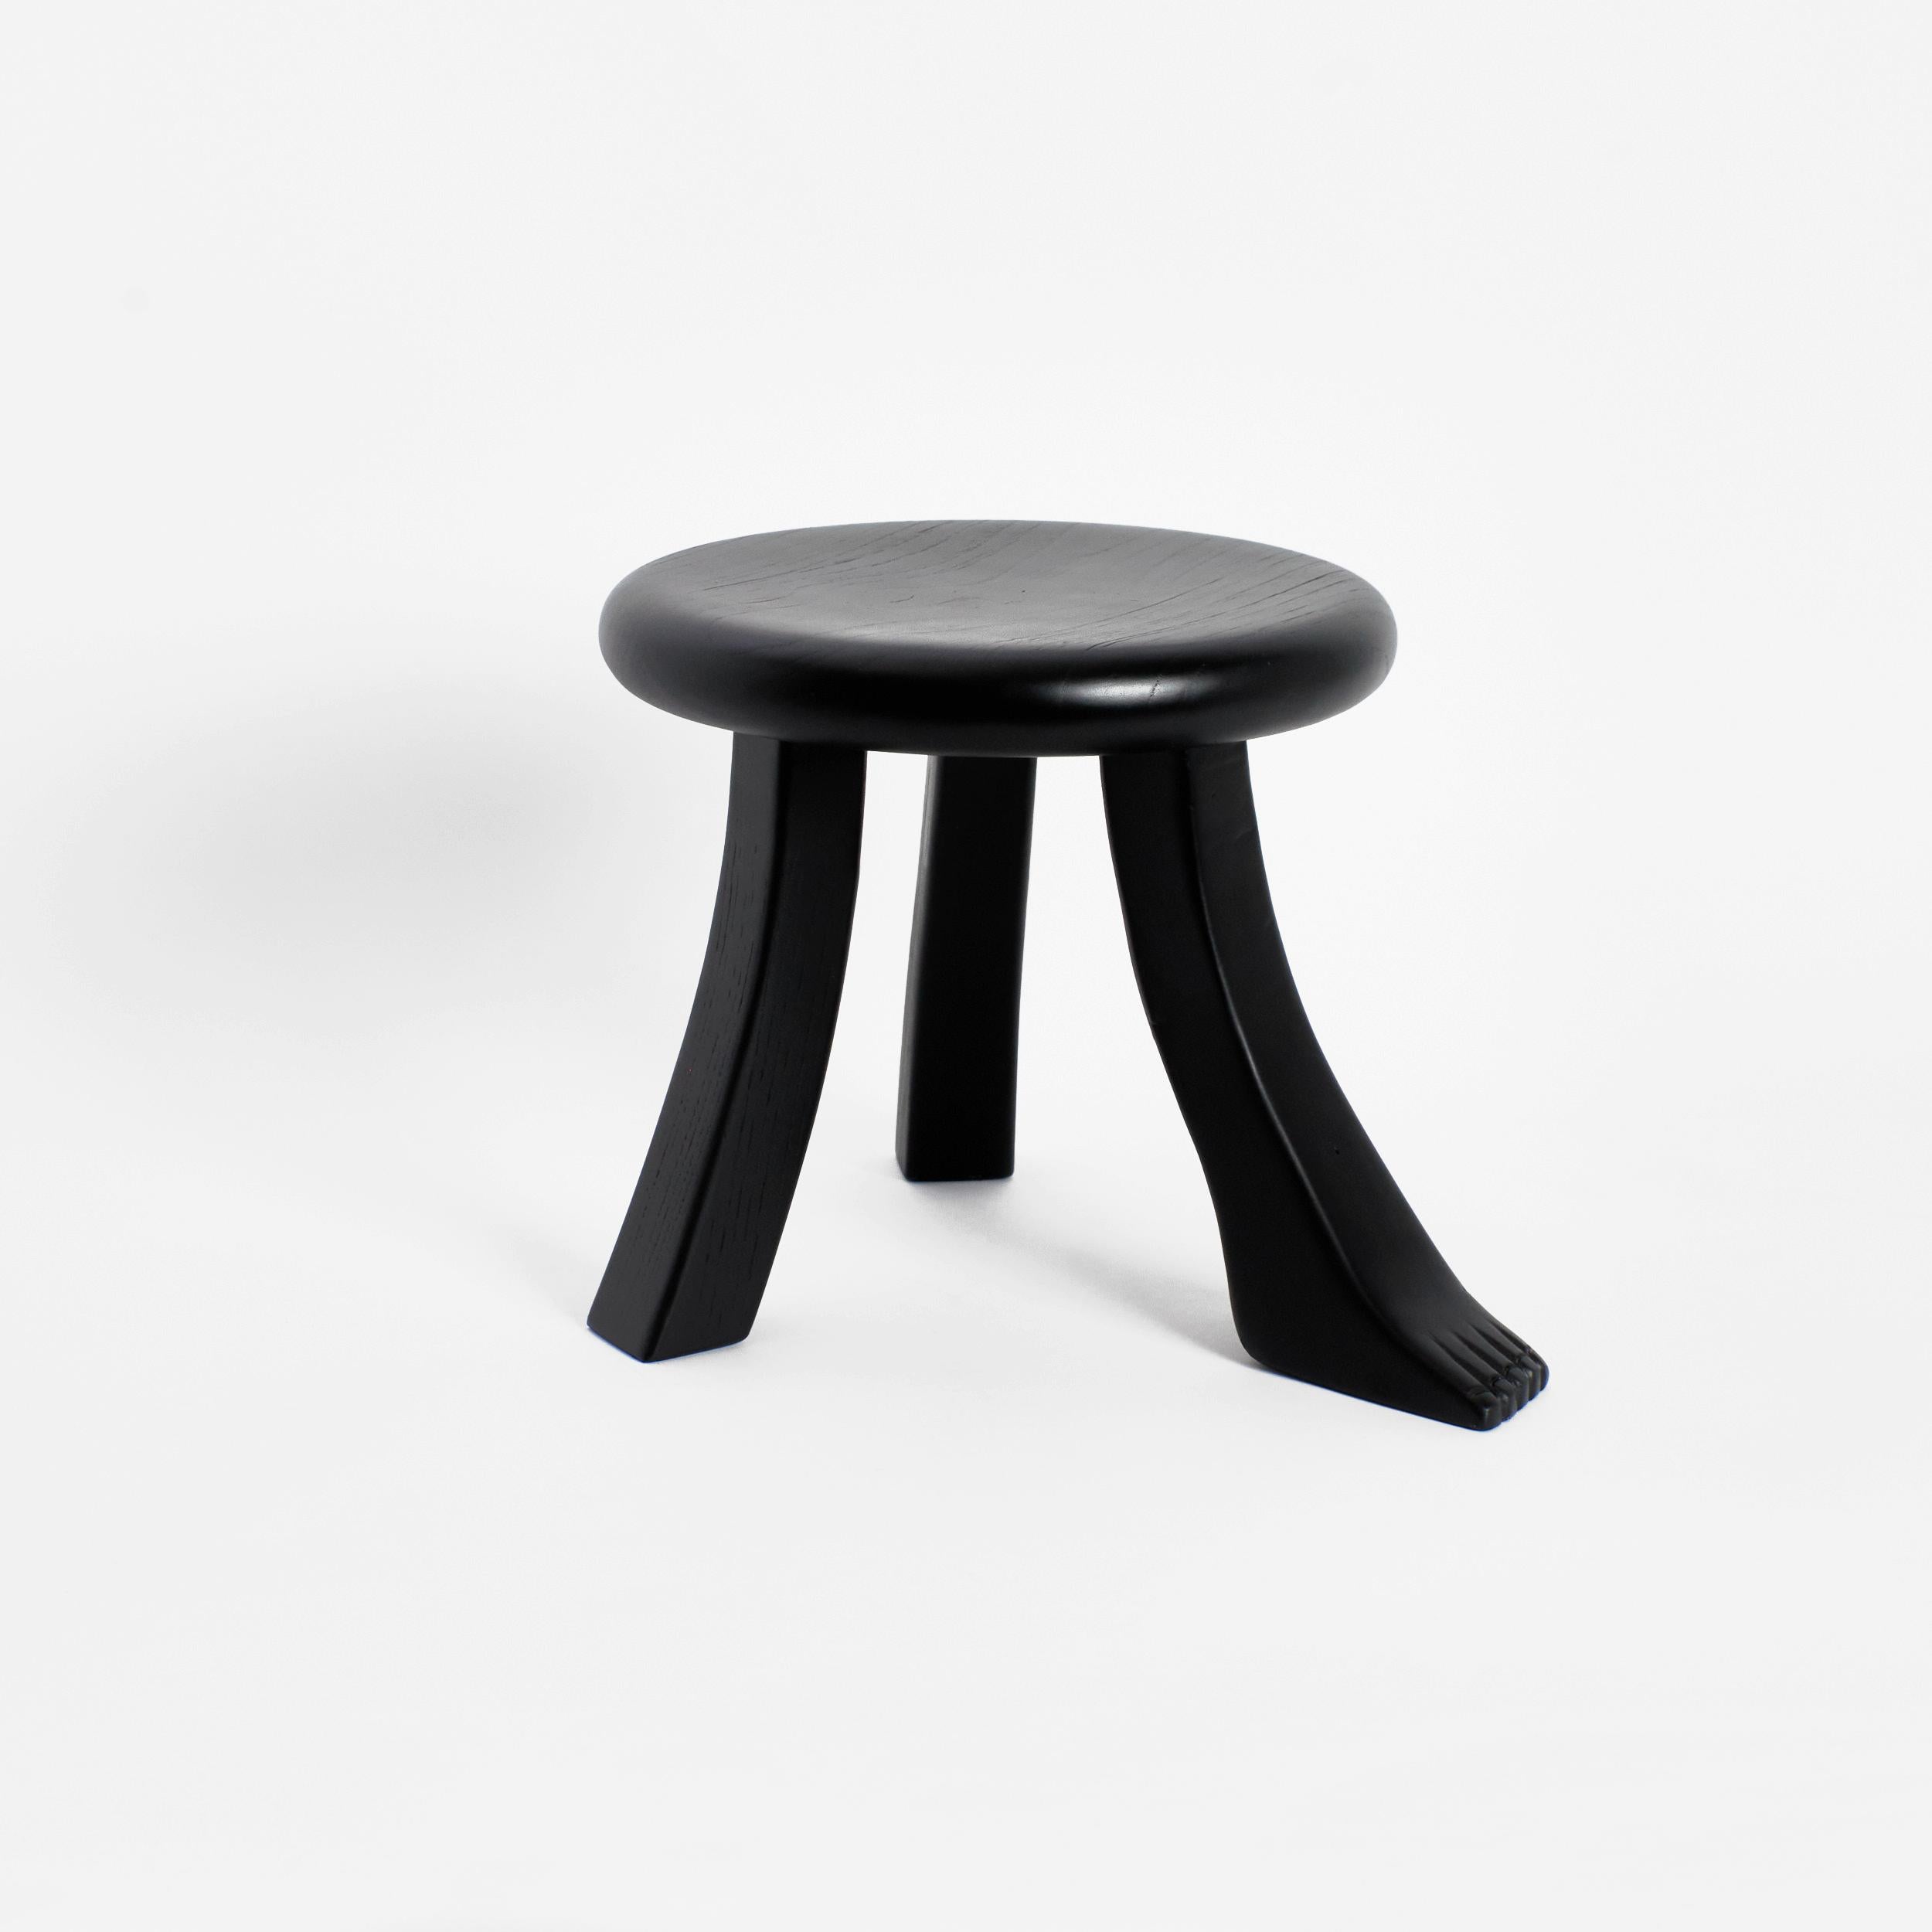 Foot stool in black by Project 213A
Dimensions: D 30 x W 30 x H 26.5 cm
Materials: Chestnut wood. 

This playful design is inspired by a classic milking stool, and has a fun twist with three individually shaped legs. The stool is hand carved by